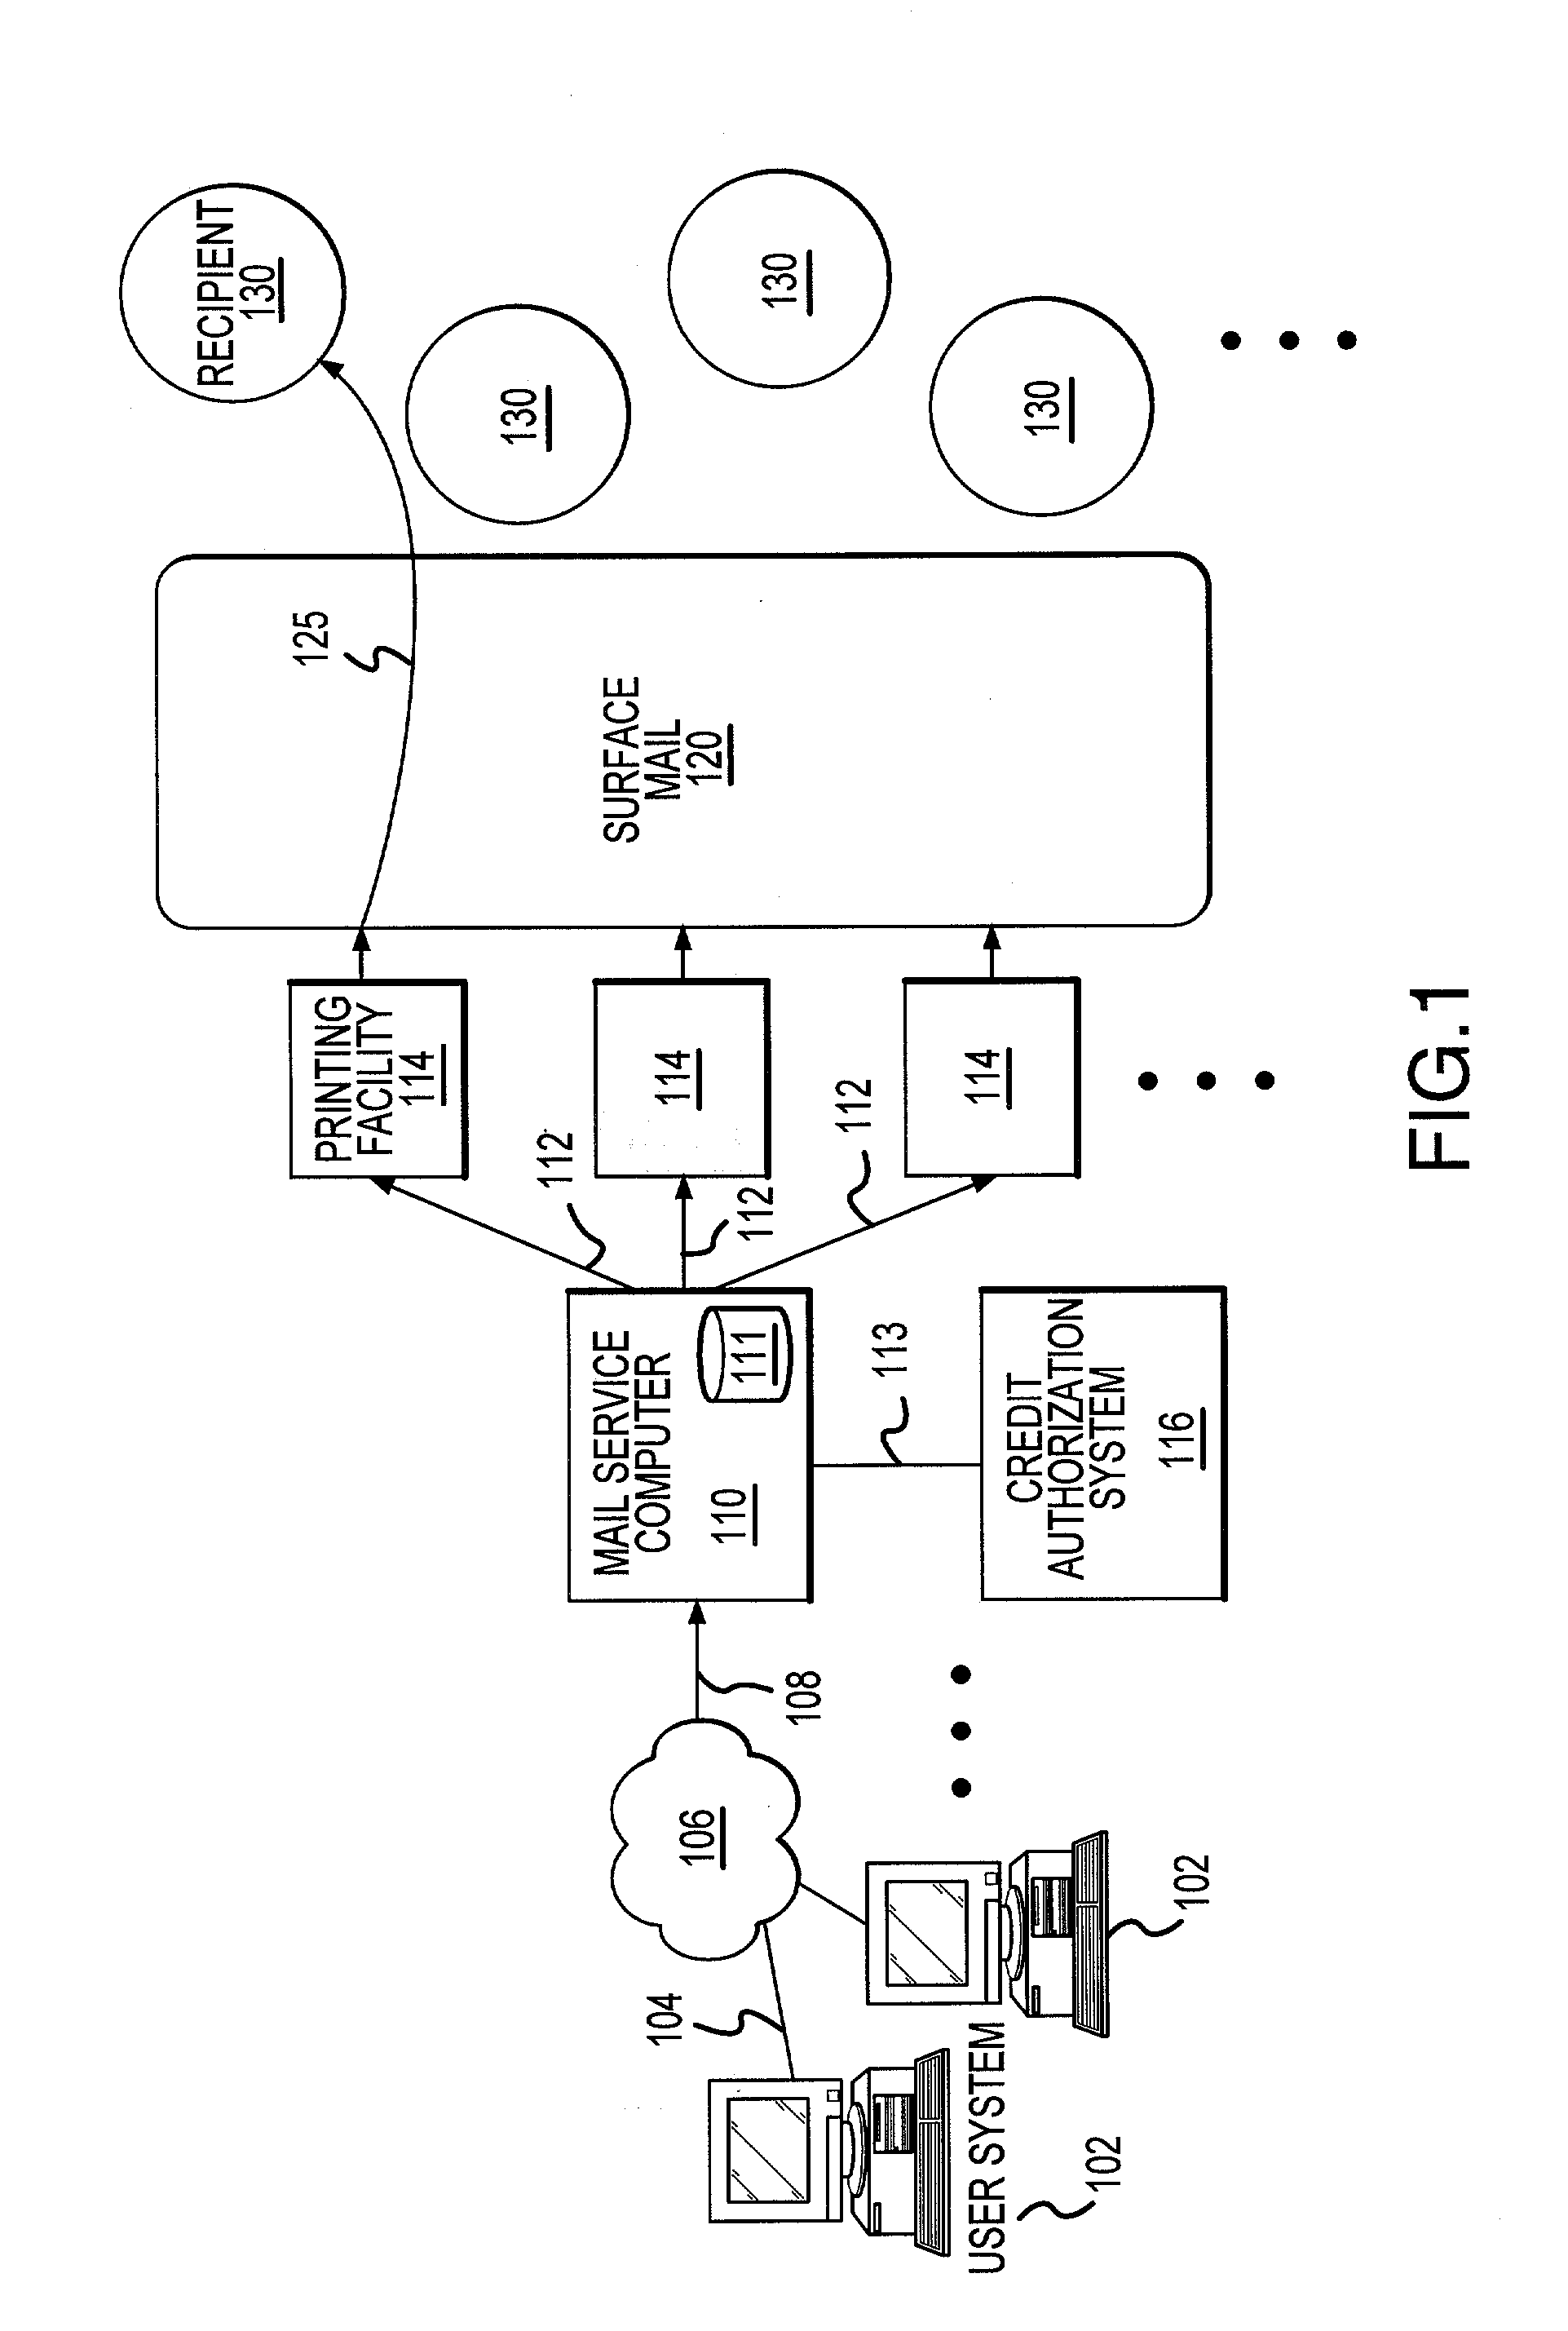 Methods and apparatus for generating and distribution of surface mail objects